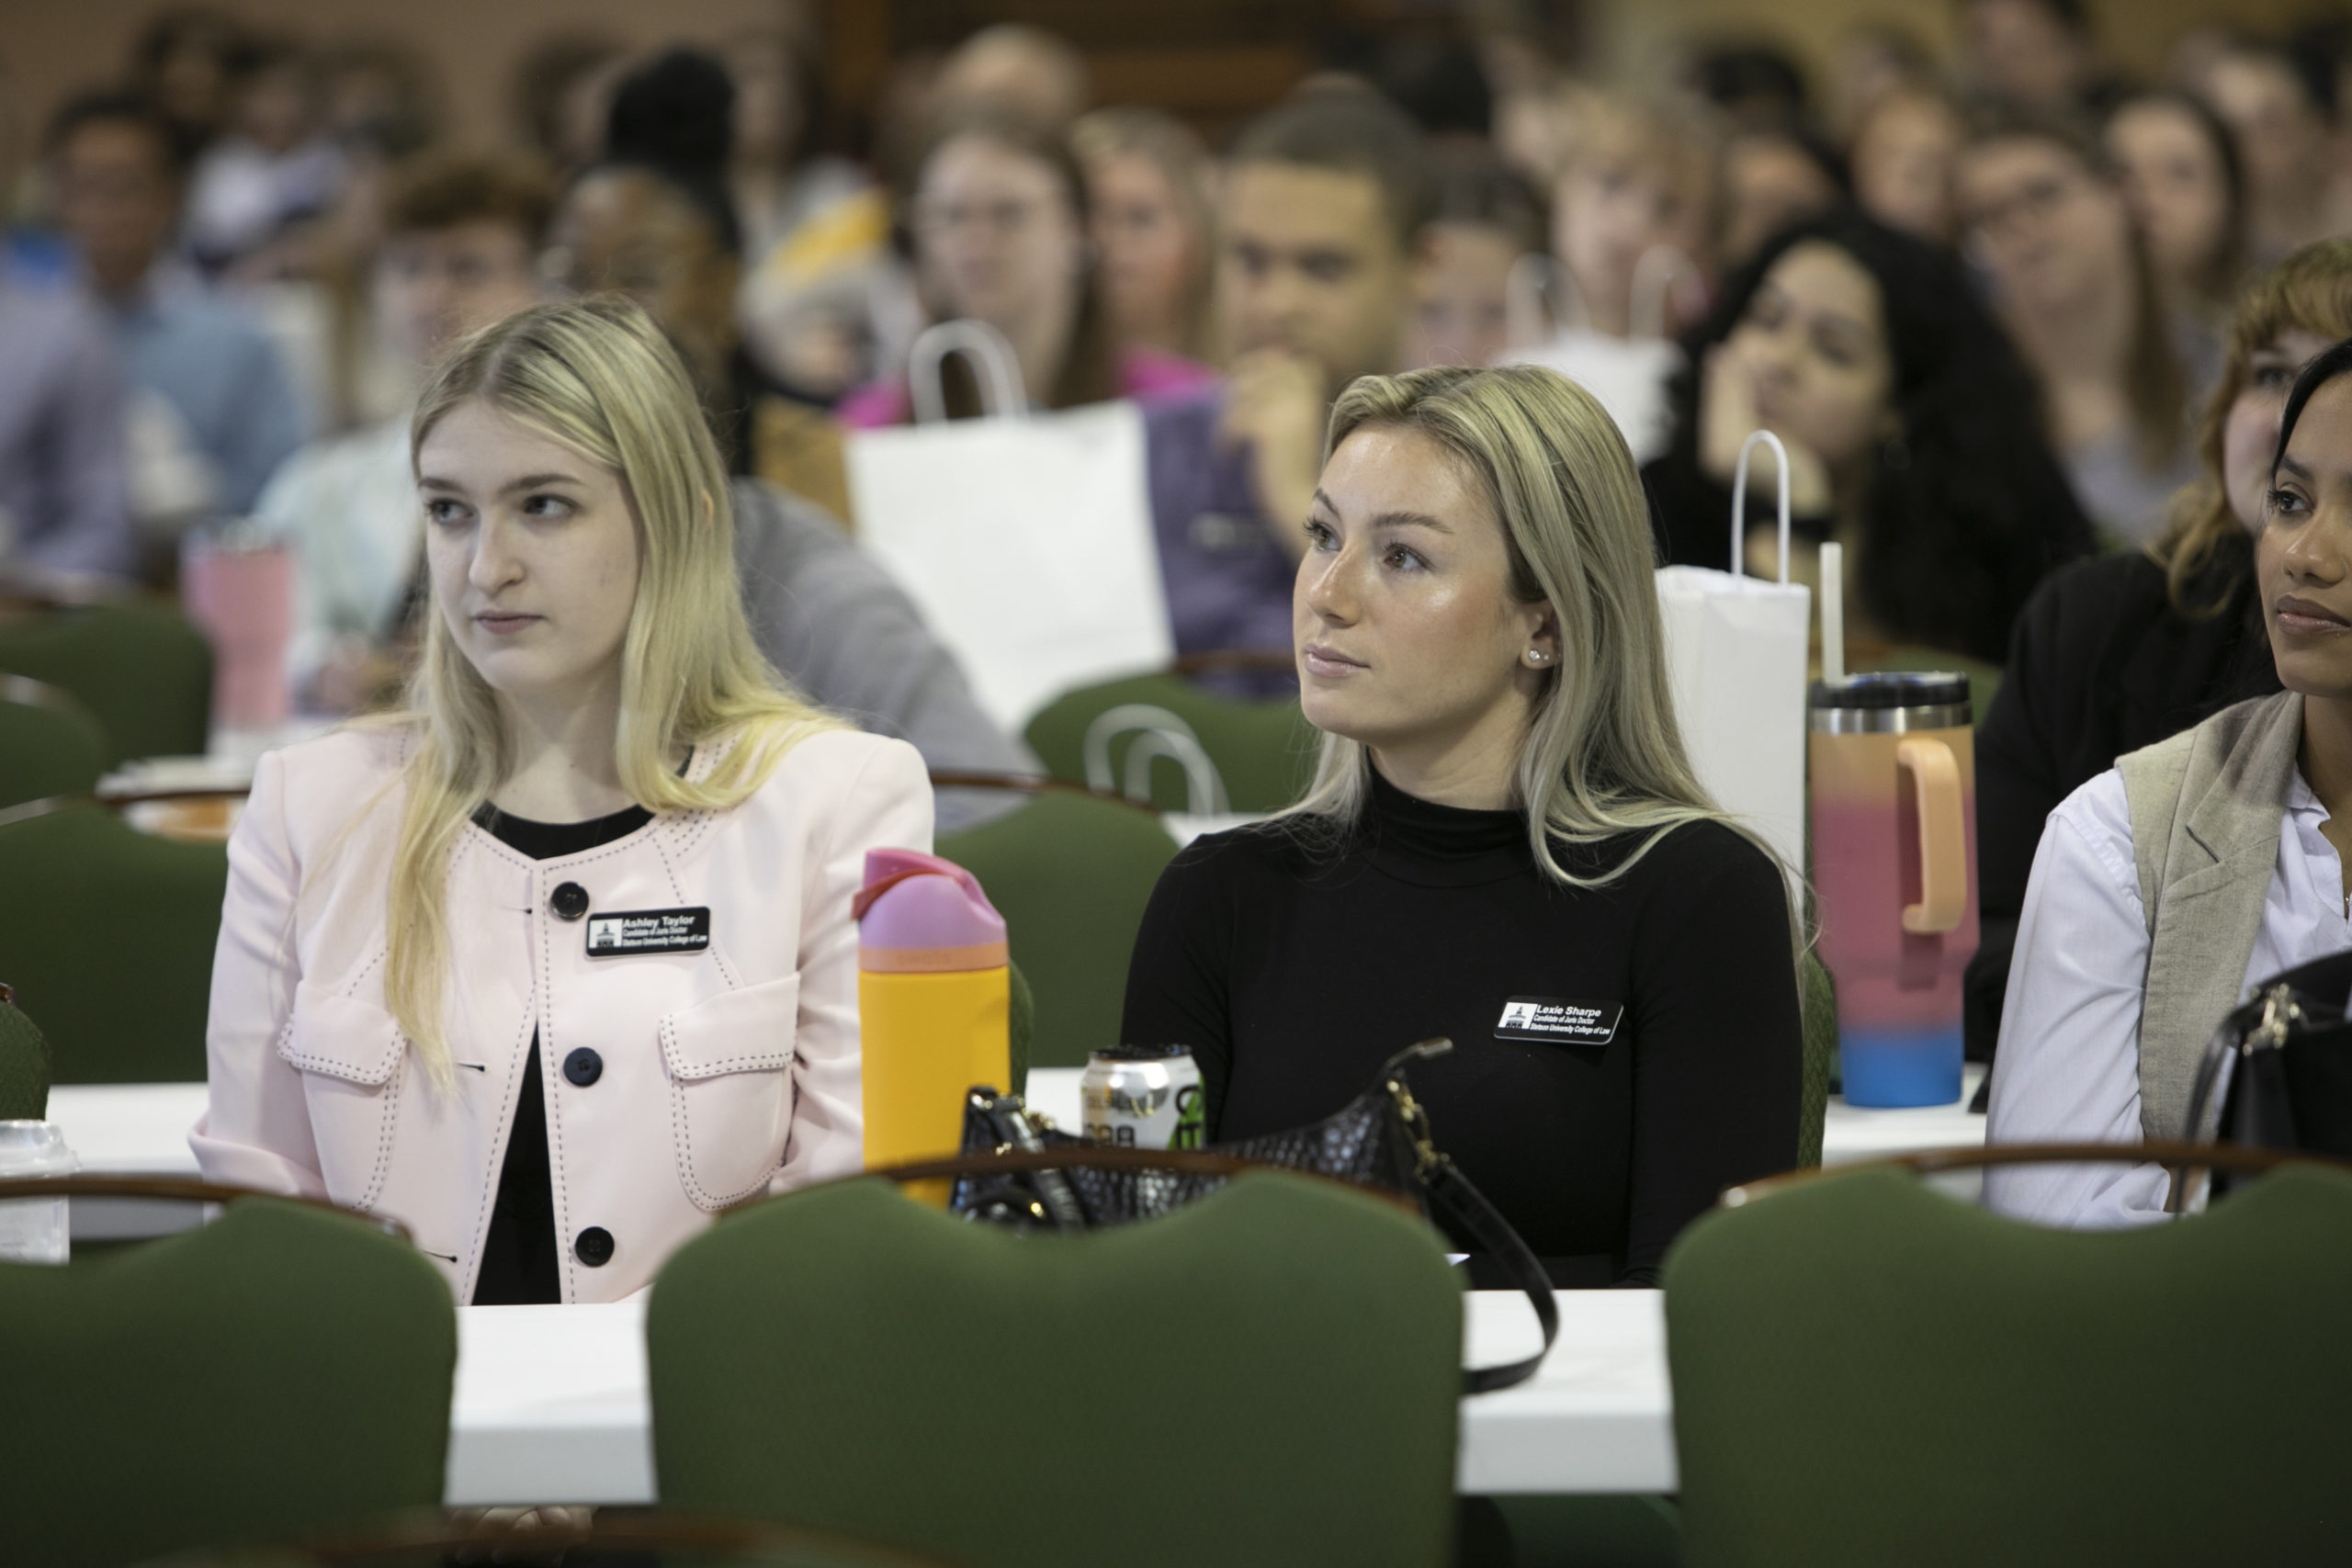 Two blonde young woman look on as a speaker addresses the audience.